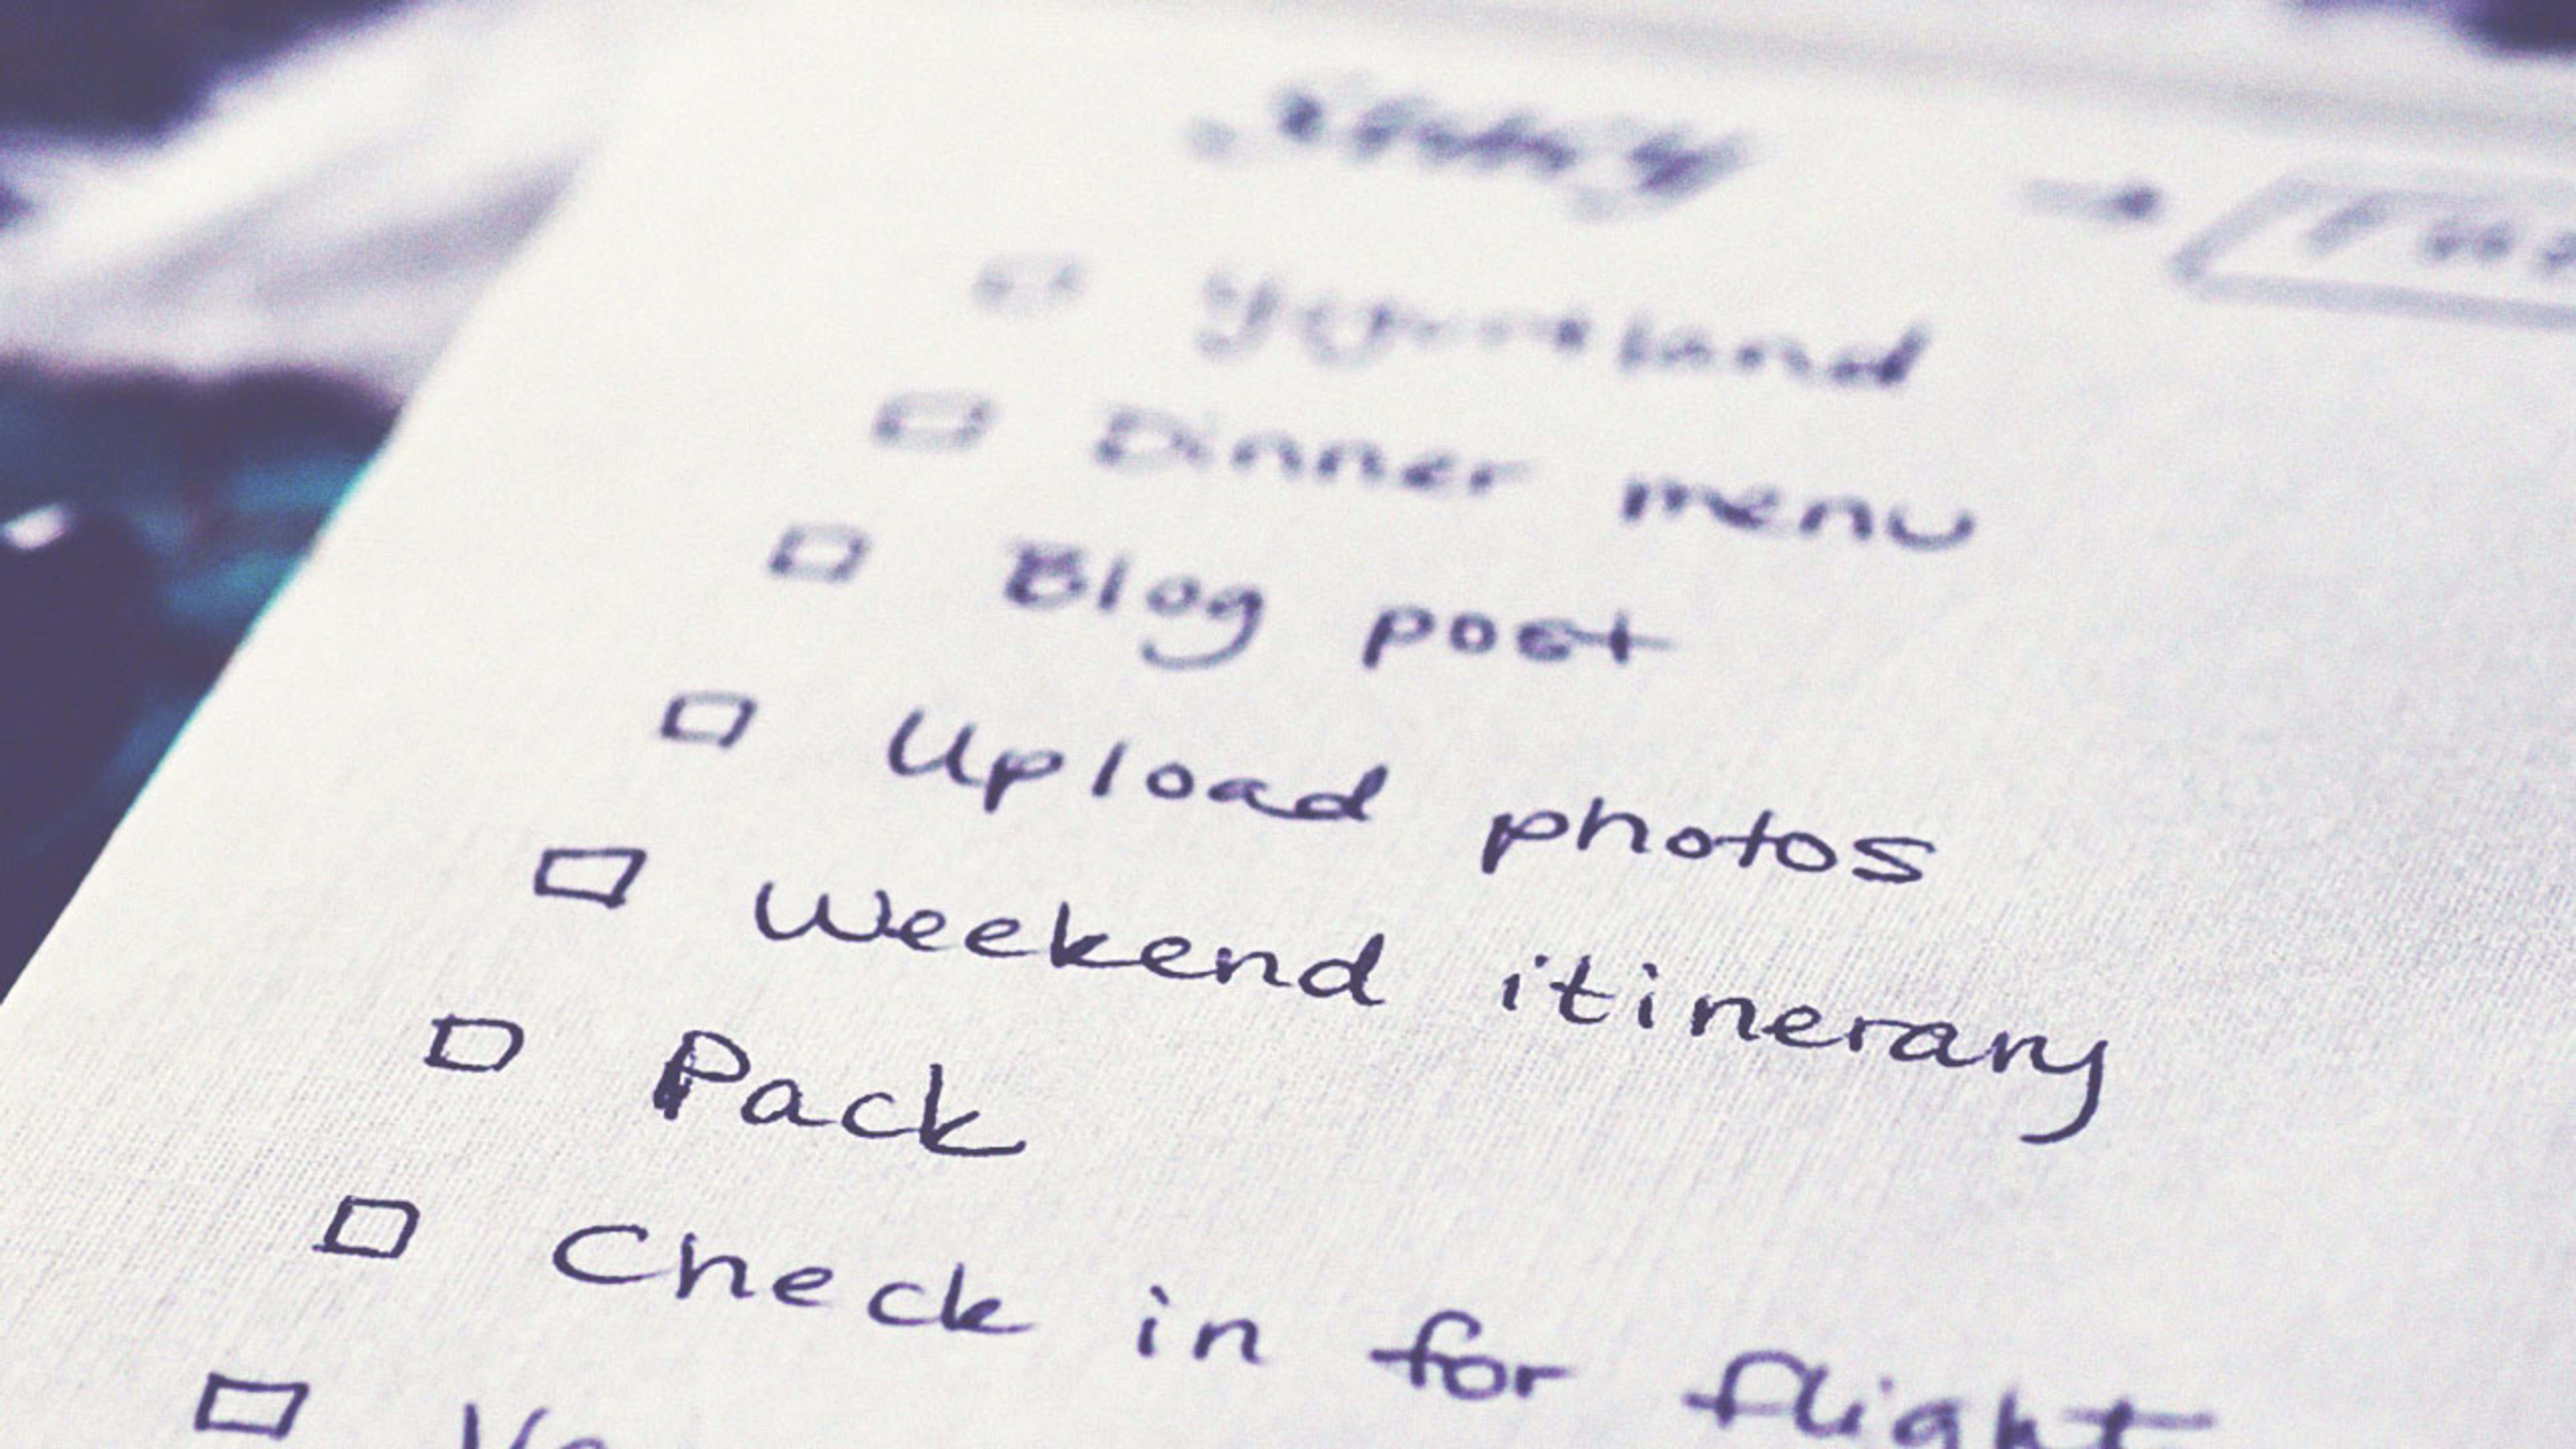 How do you make a to-do list that works?